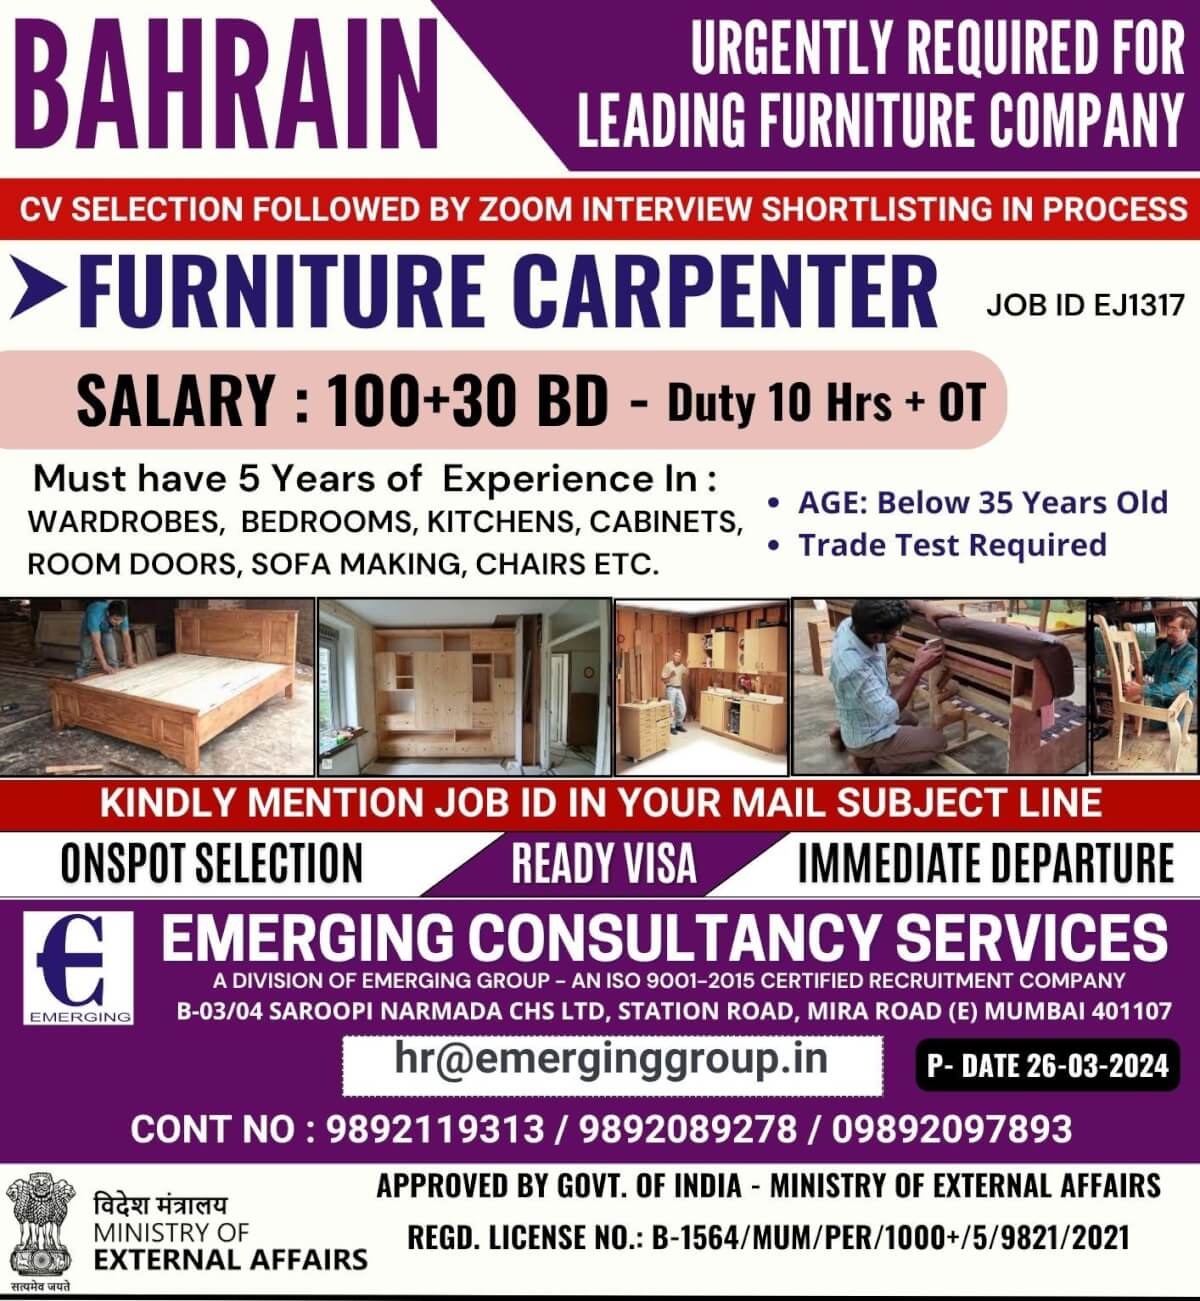 URGENTLY REQUIRED FOR LEADING FURNITURE COMPANY IN BAHRAIN